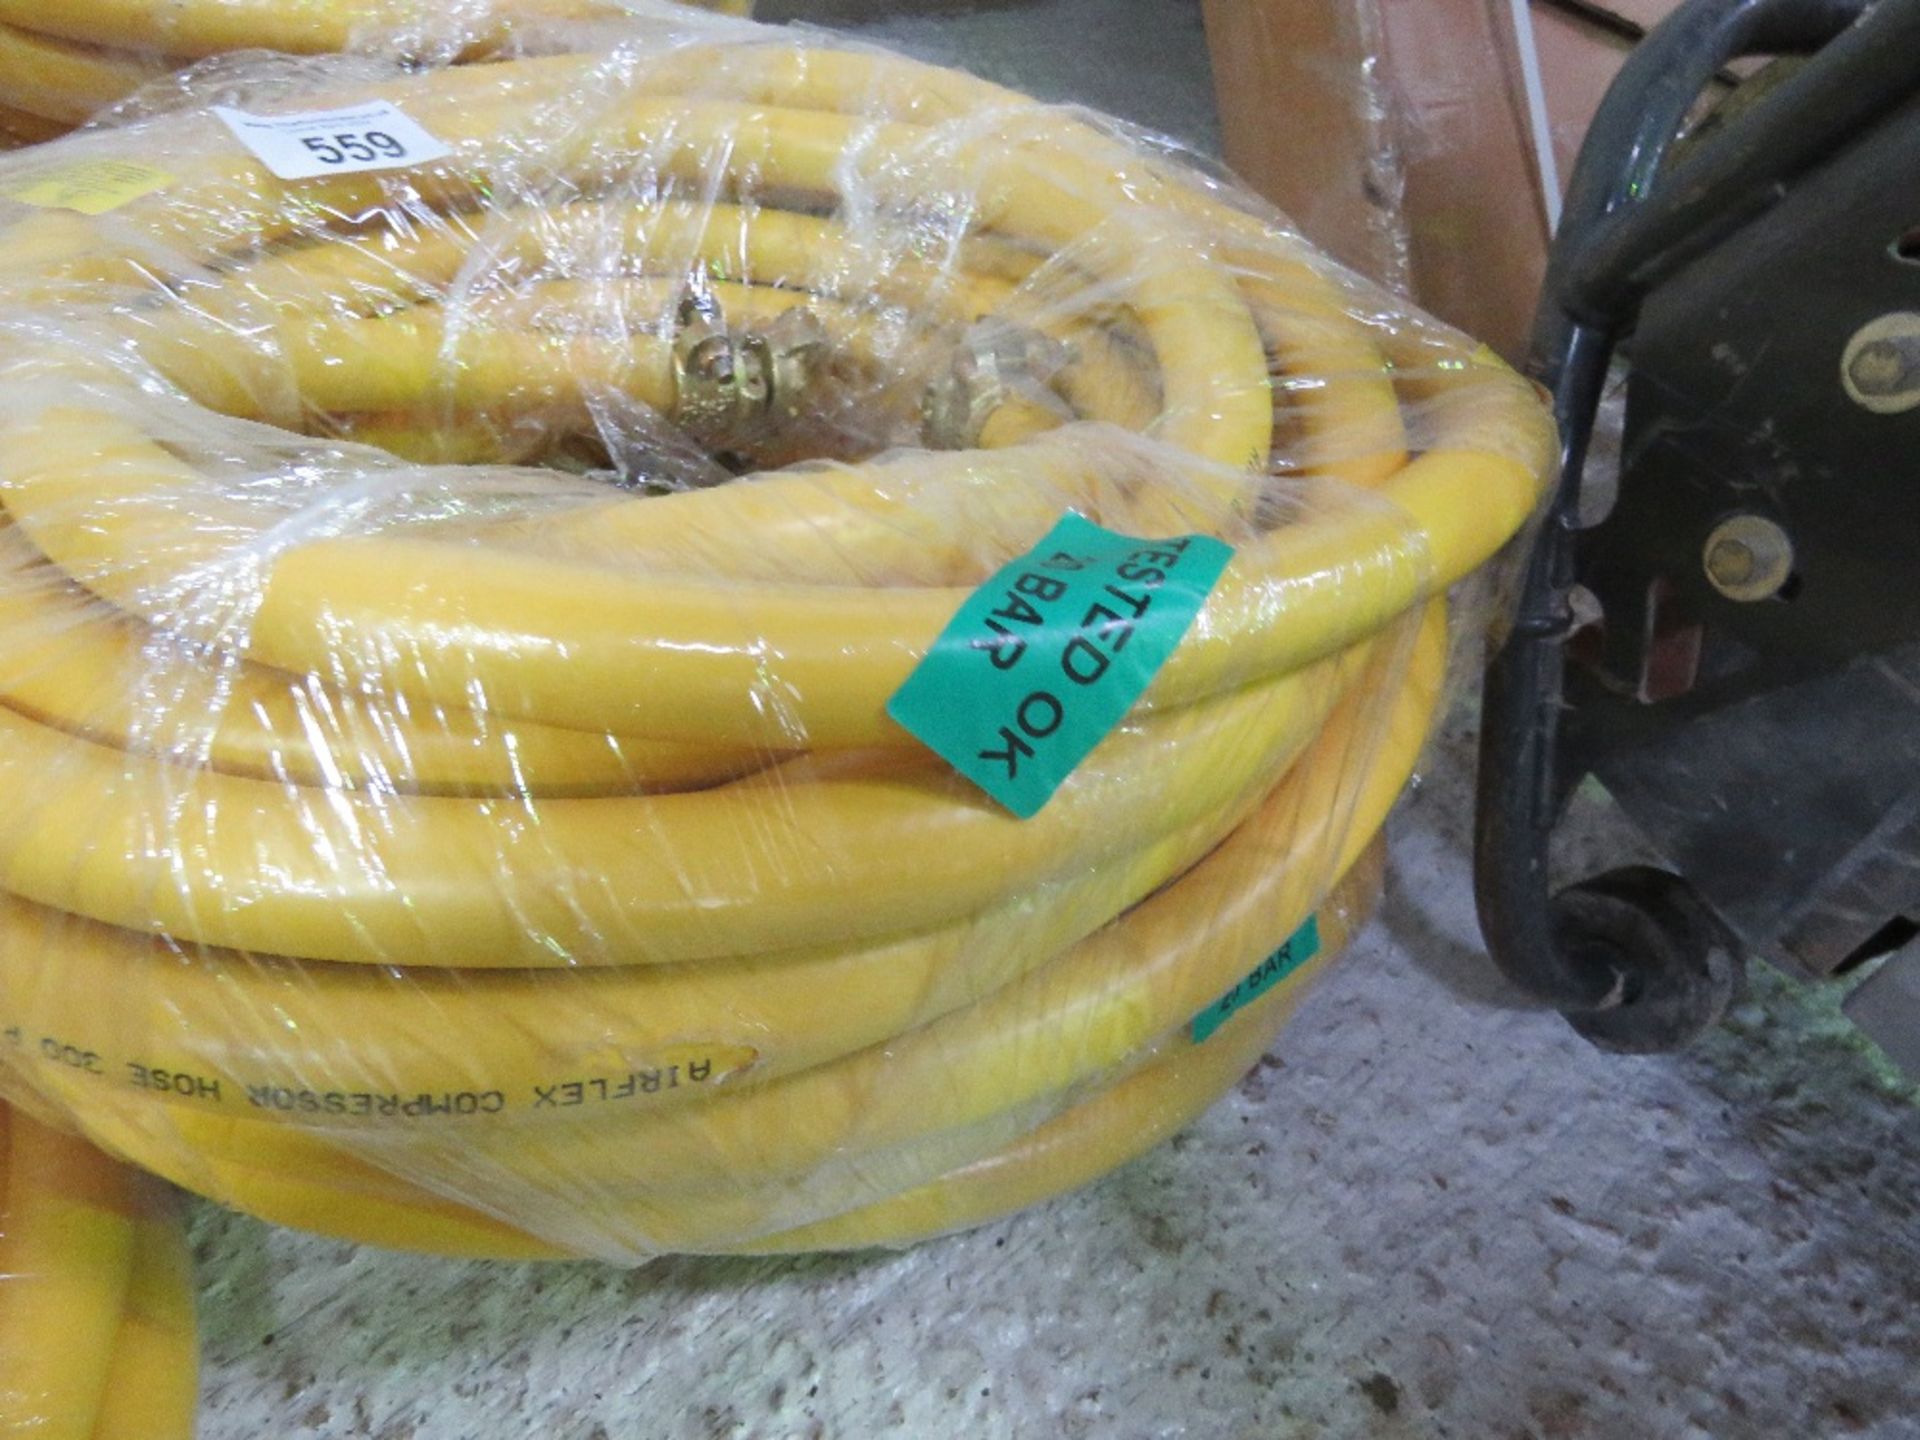 2NO UNUSED COMPRESSOR AIR HOSES 15M LENGTH, TESTED TO 20BAR, 3/4BSP FITTINGS, 19MMX29MM.